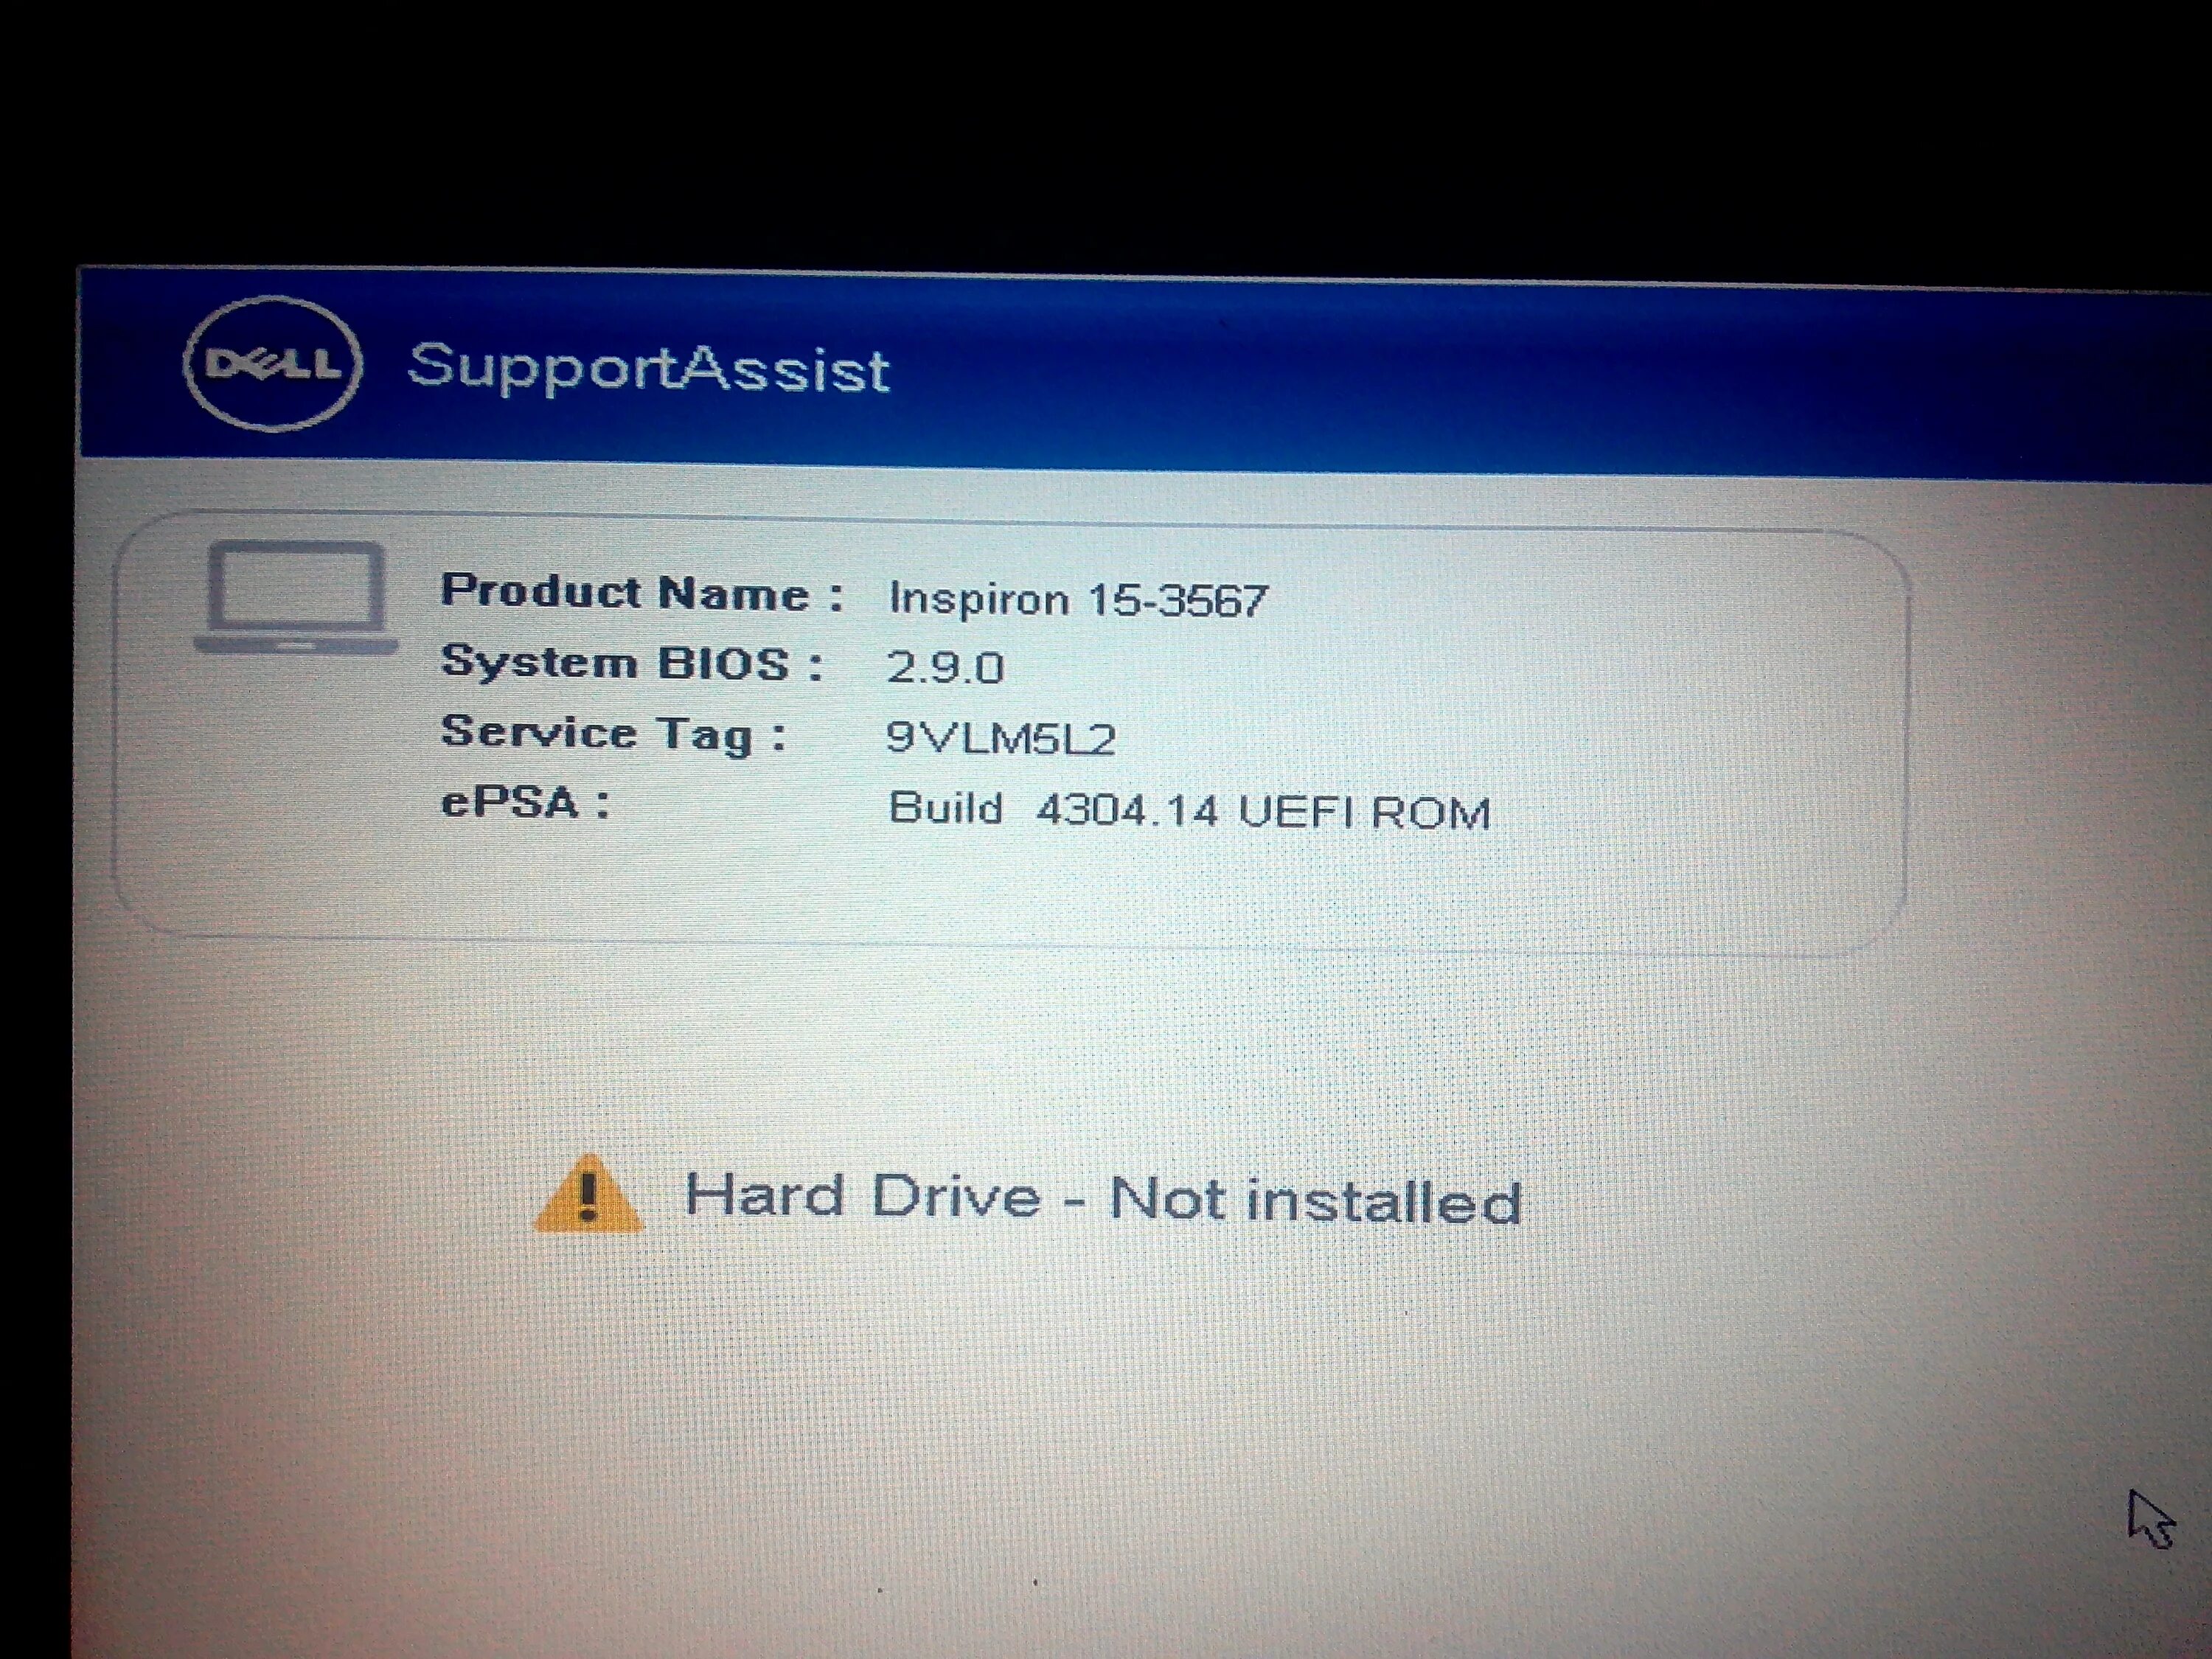 Ноутбук dell hard Drive - not installed. Hard Drive not installed что делать dell. Dell Inspiron 15 3567 BIOS. SSD dell hard Drive not installed.